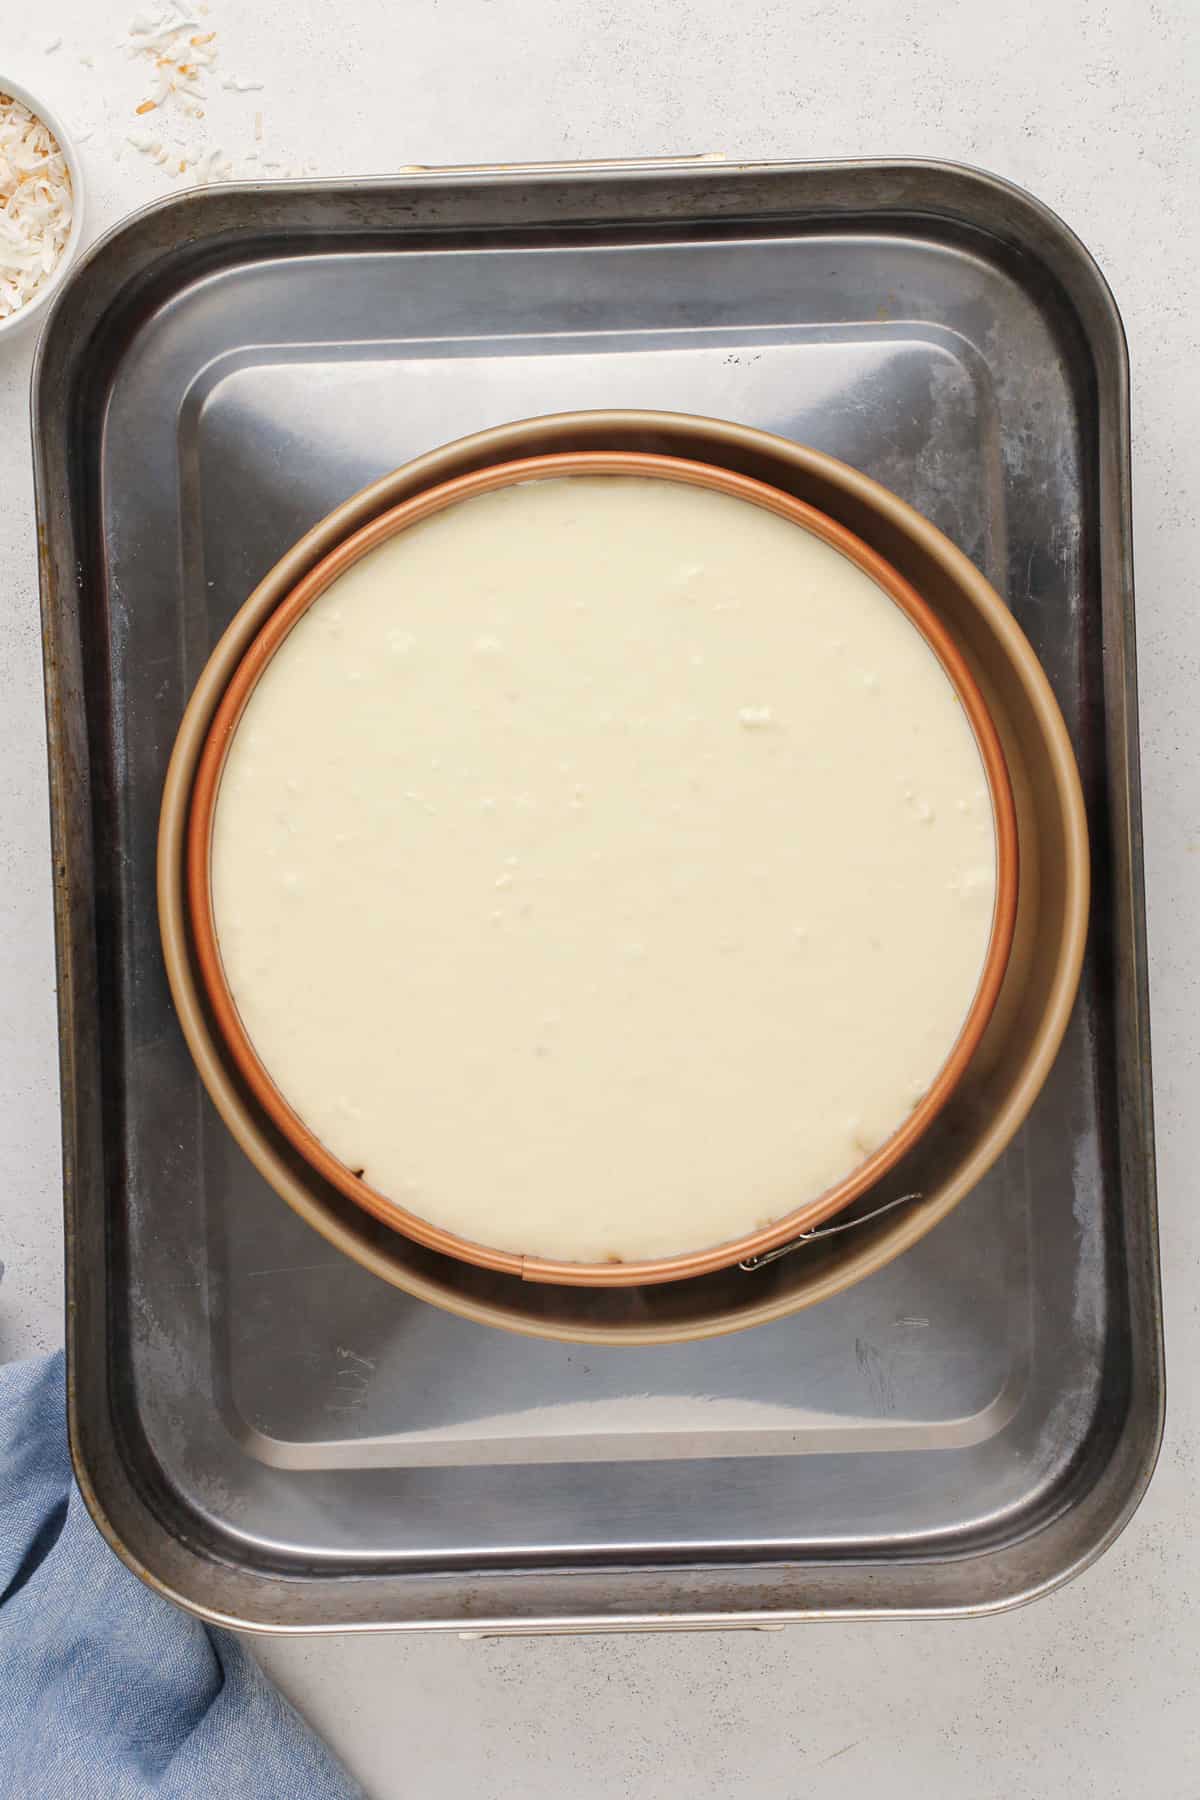 Unbaked coconut cheesecake in a water bath.